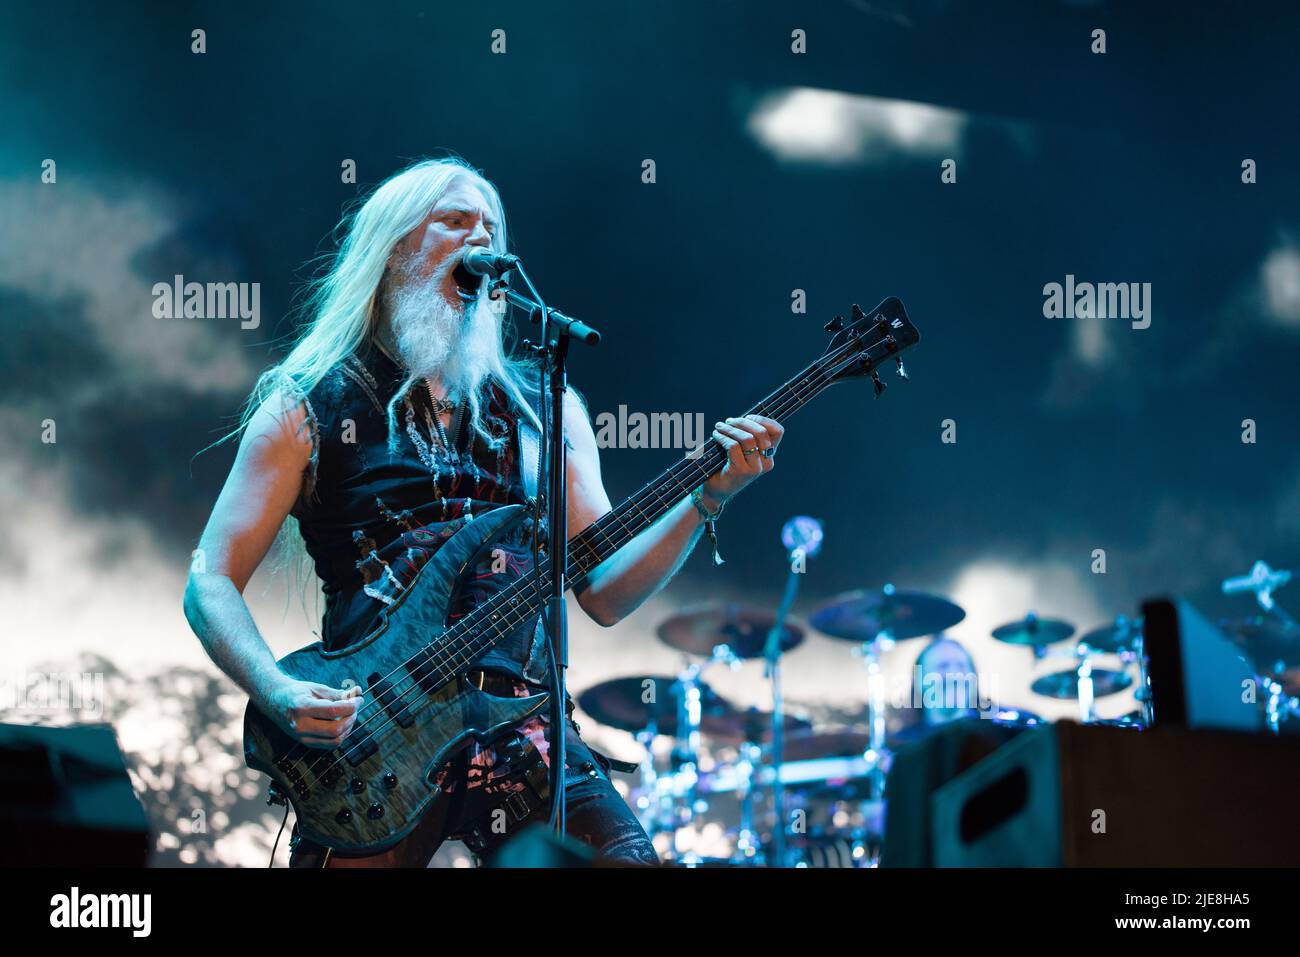 Catton Park, Derbyshire, UK, Sunday 12 August 2018. Nightwish headline the Ronnie James Dio stage at Bloodstock Festival. Credit: Tracy Daniel/Alamy Stock Photo